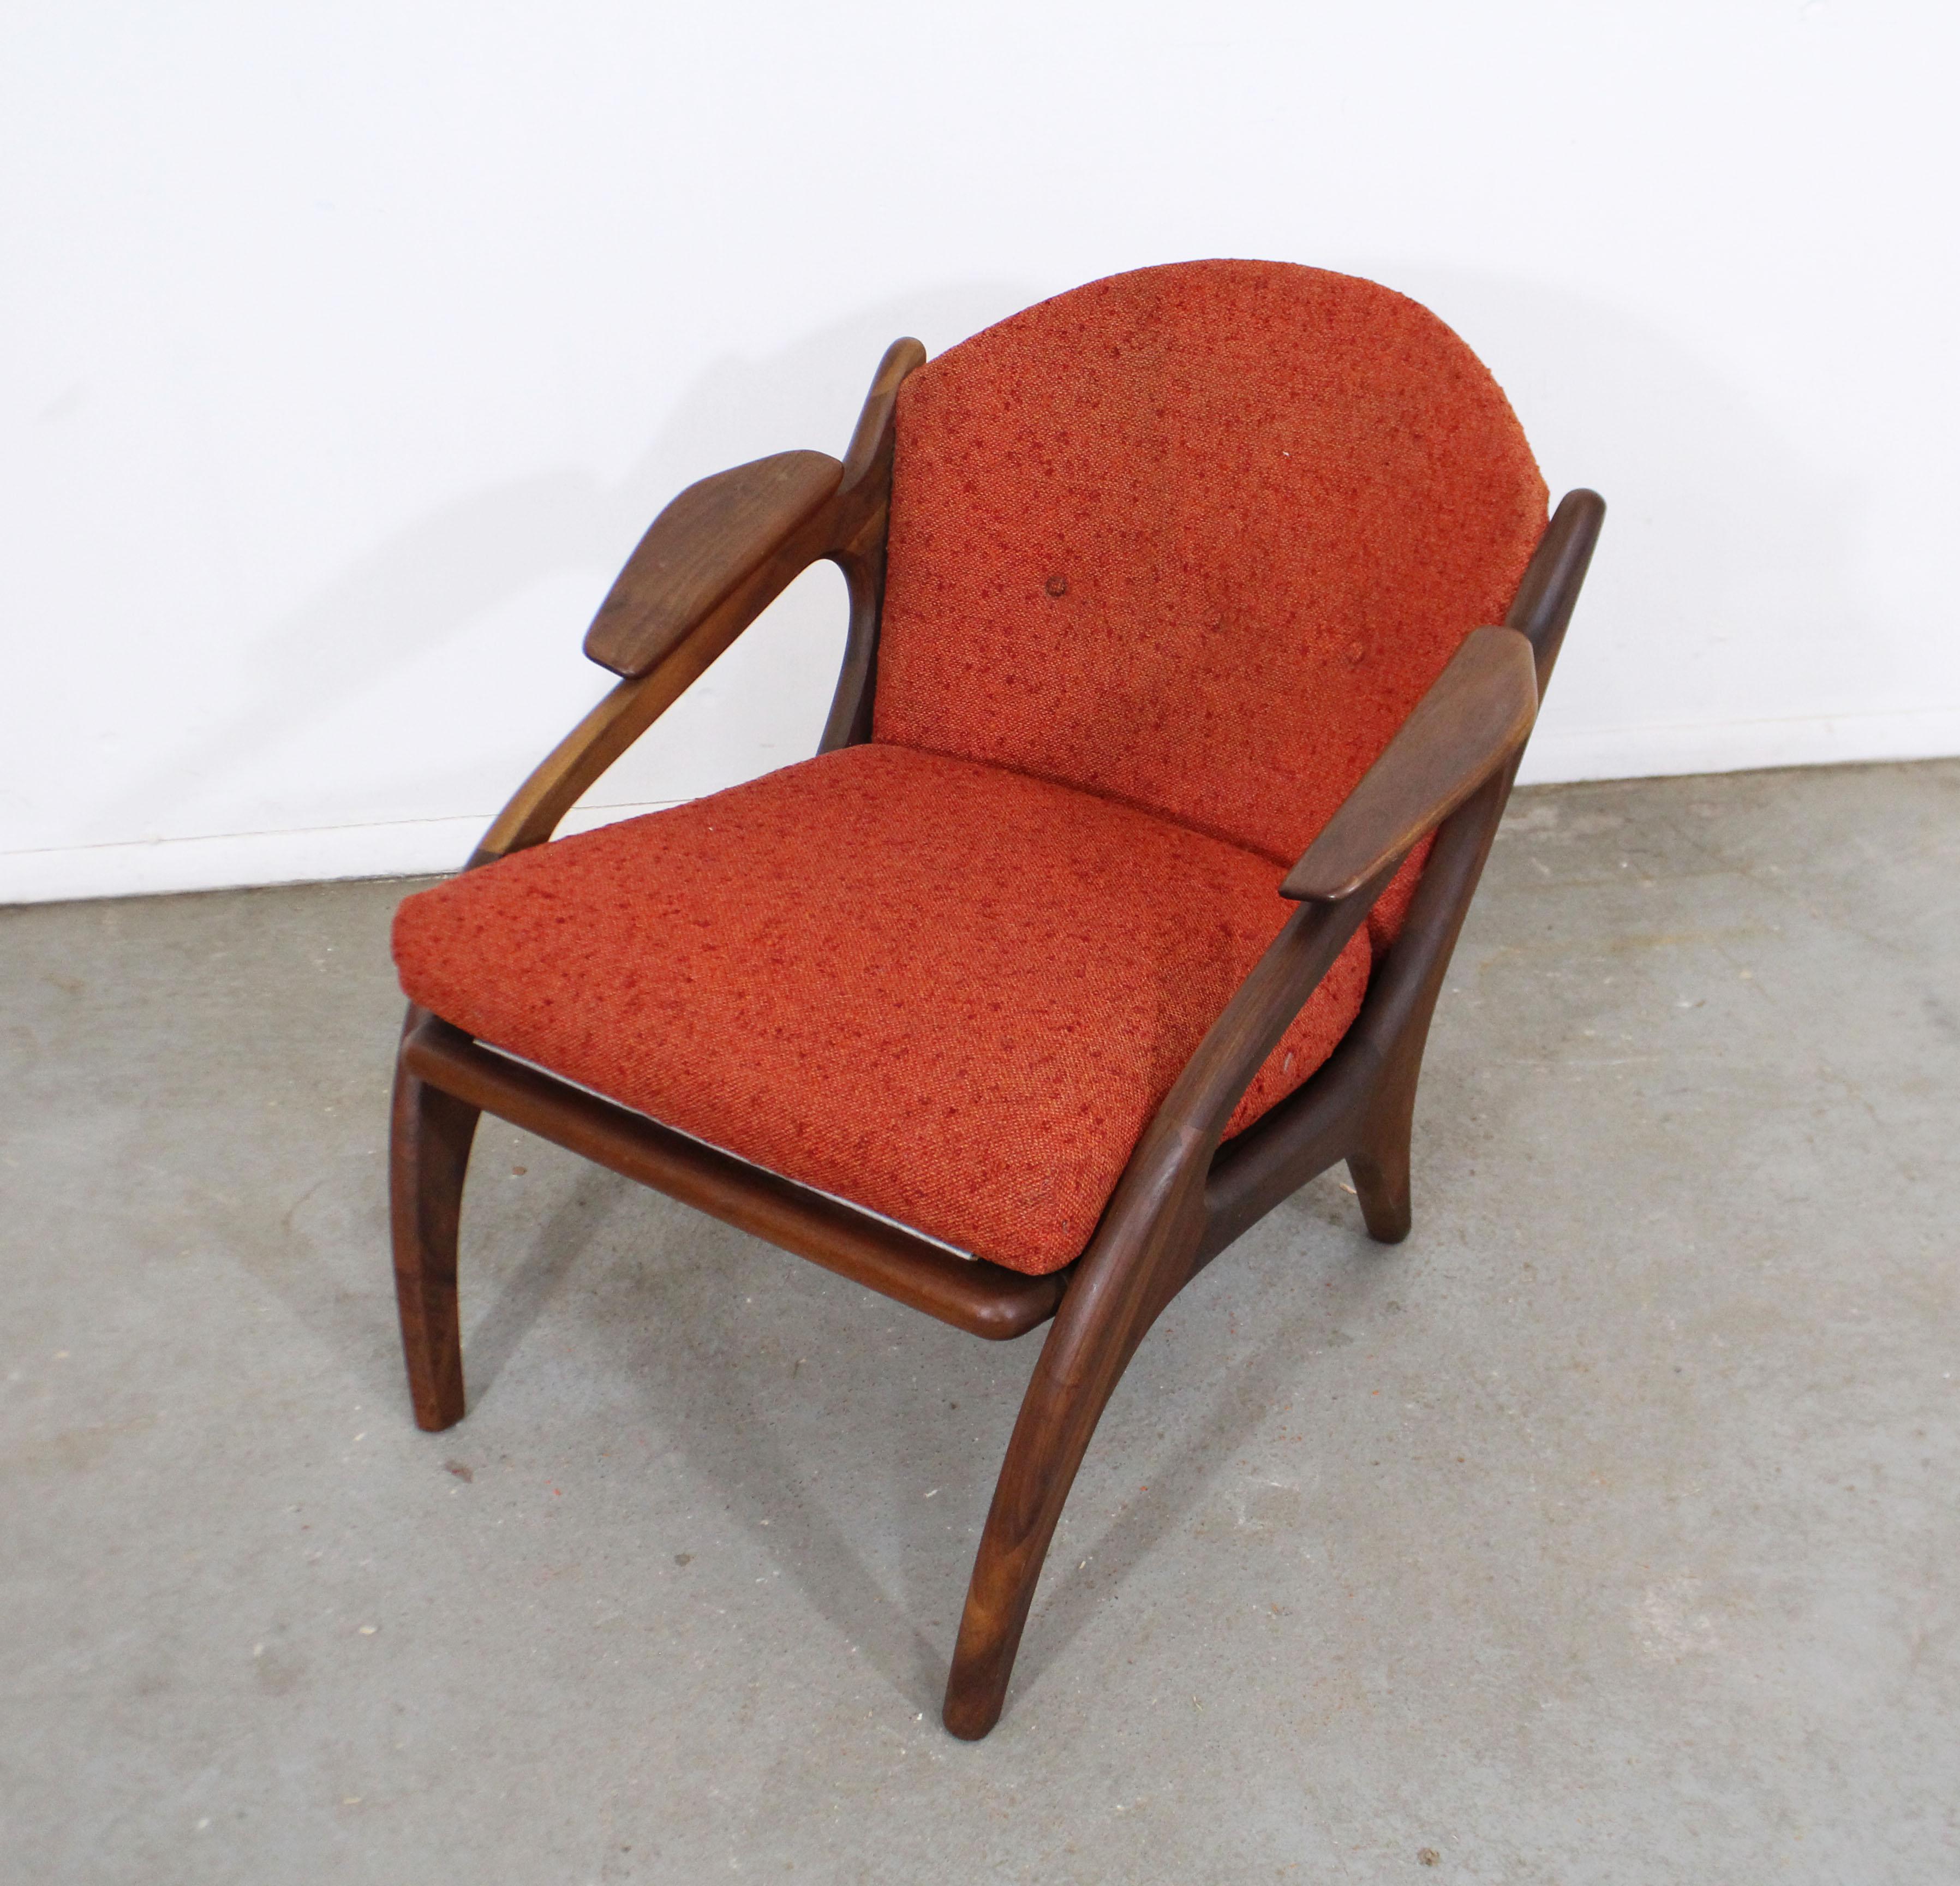 Offered is a Classic Mid-Century Modern lounge chair, designed by Adrian Pearsall for Craft Associates (#2249-C). Has a walnut base with uniquely sculpted arm rests and red upholstery. It is in good condition, but should be reupholstered, showing